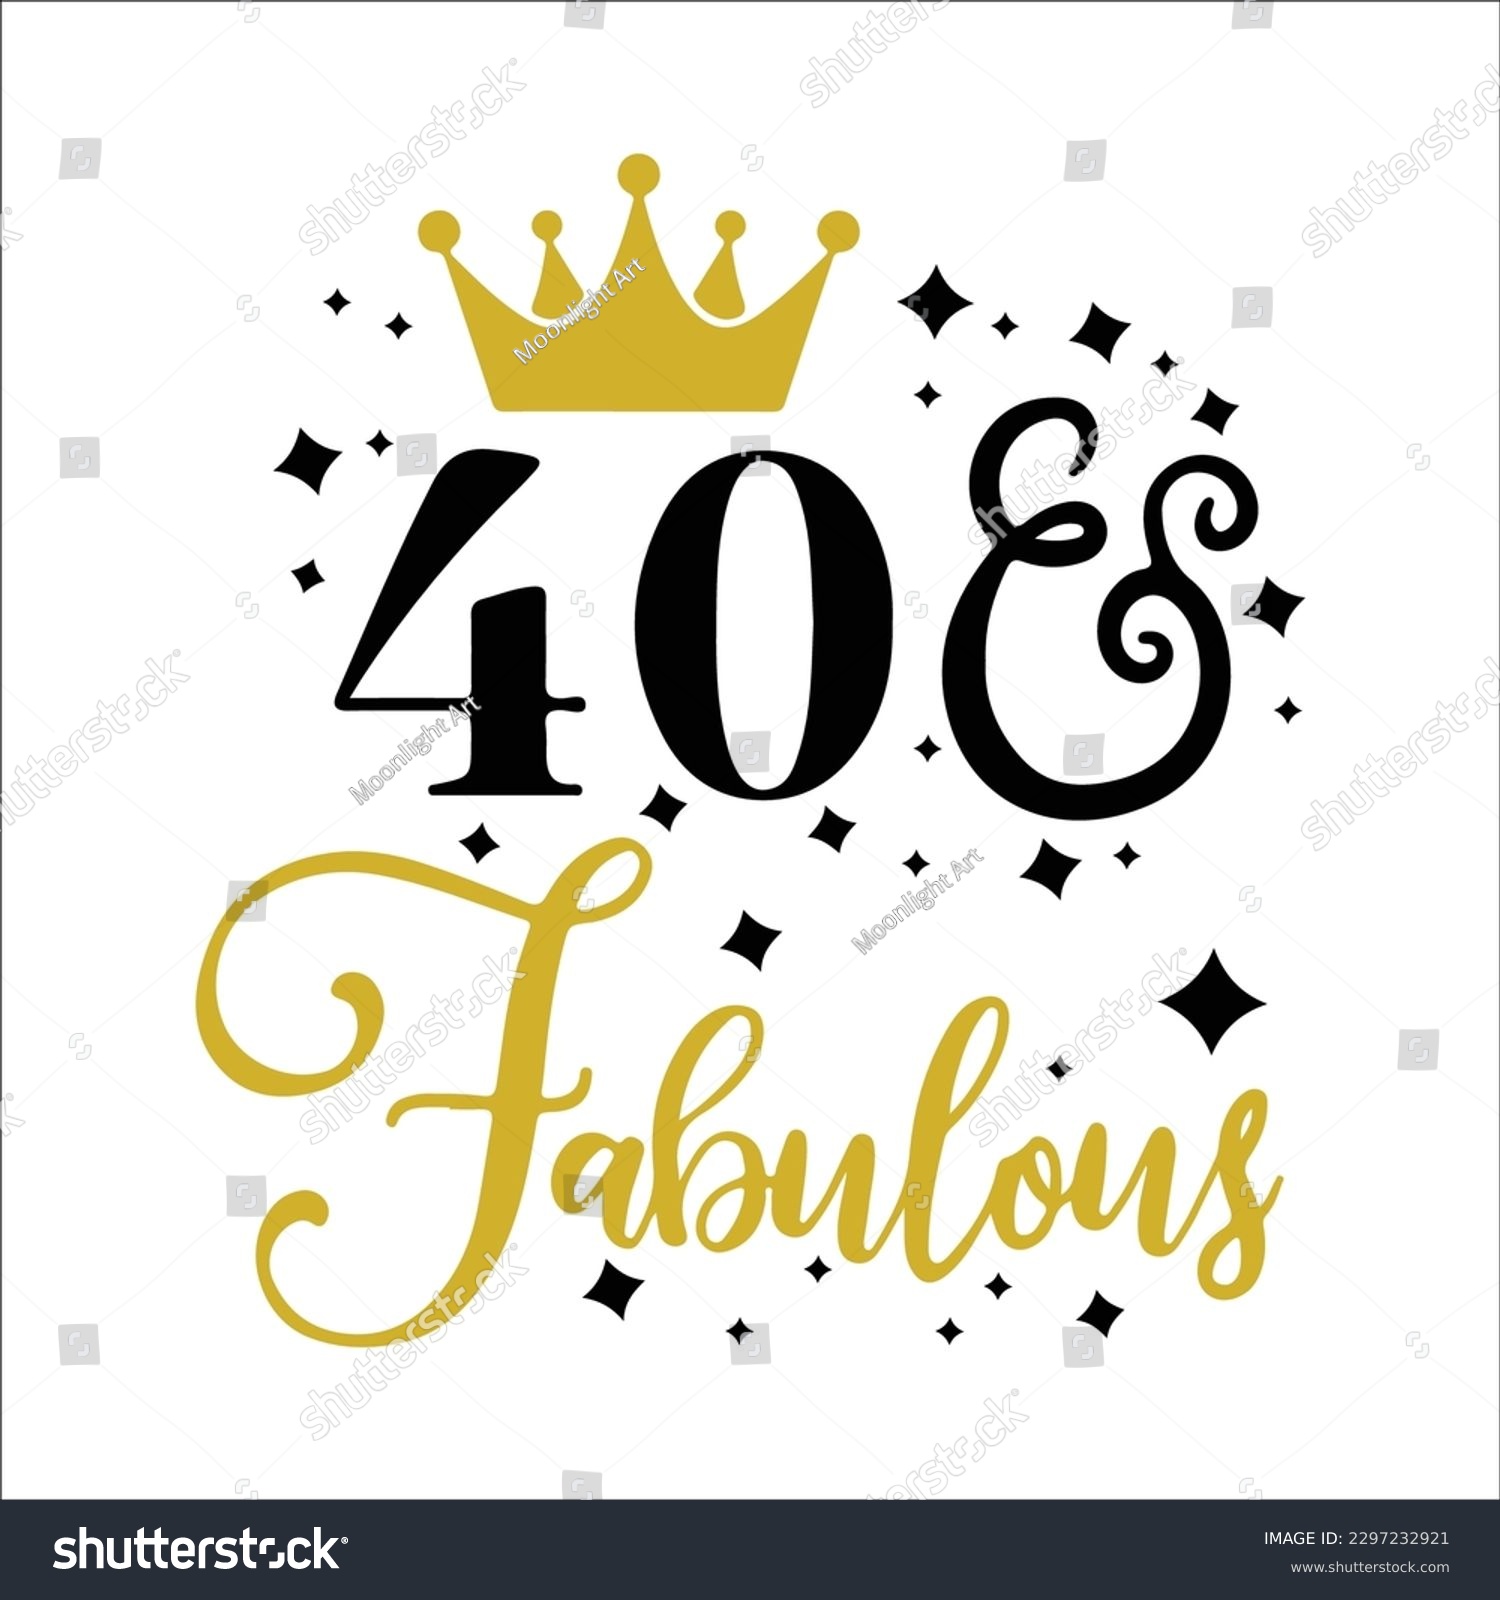 SVG of  40 and fabulous svg, fabulous at 40 svg, 40 and fab svg, 40th birthday svg for women, 40th birthday,40 years old svg,forty birthday  svg